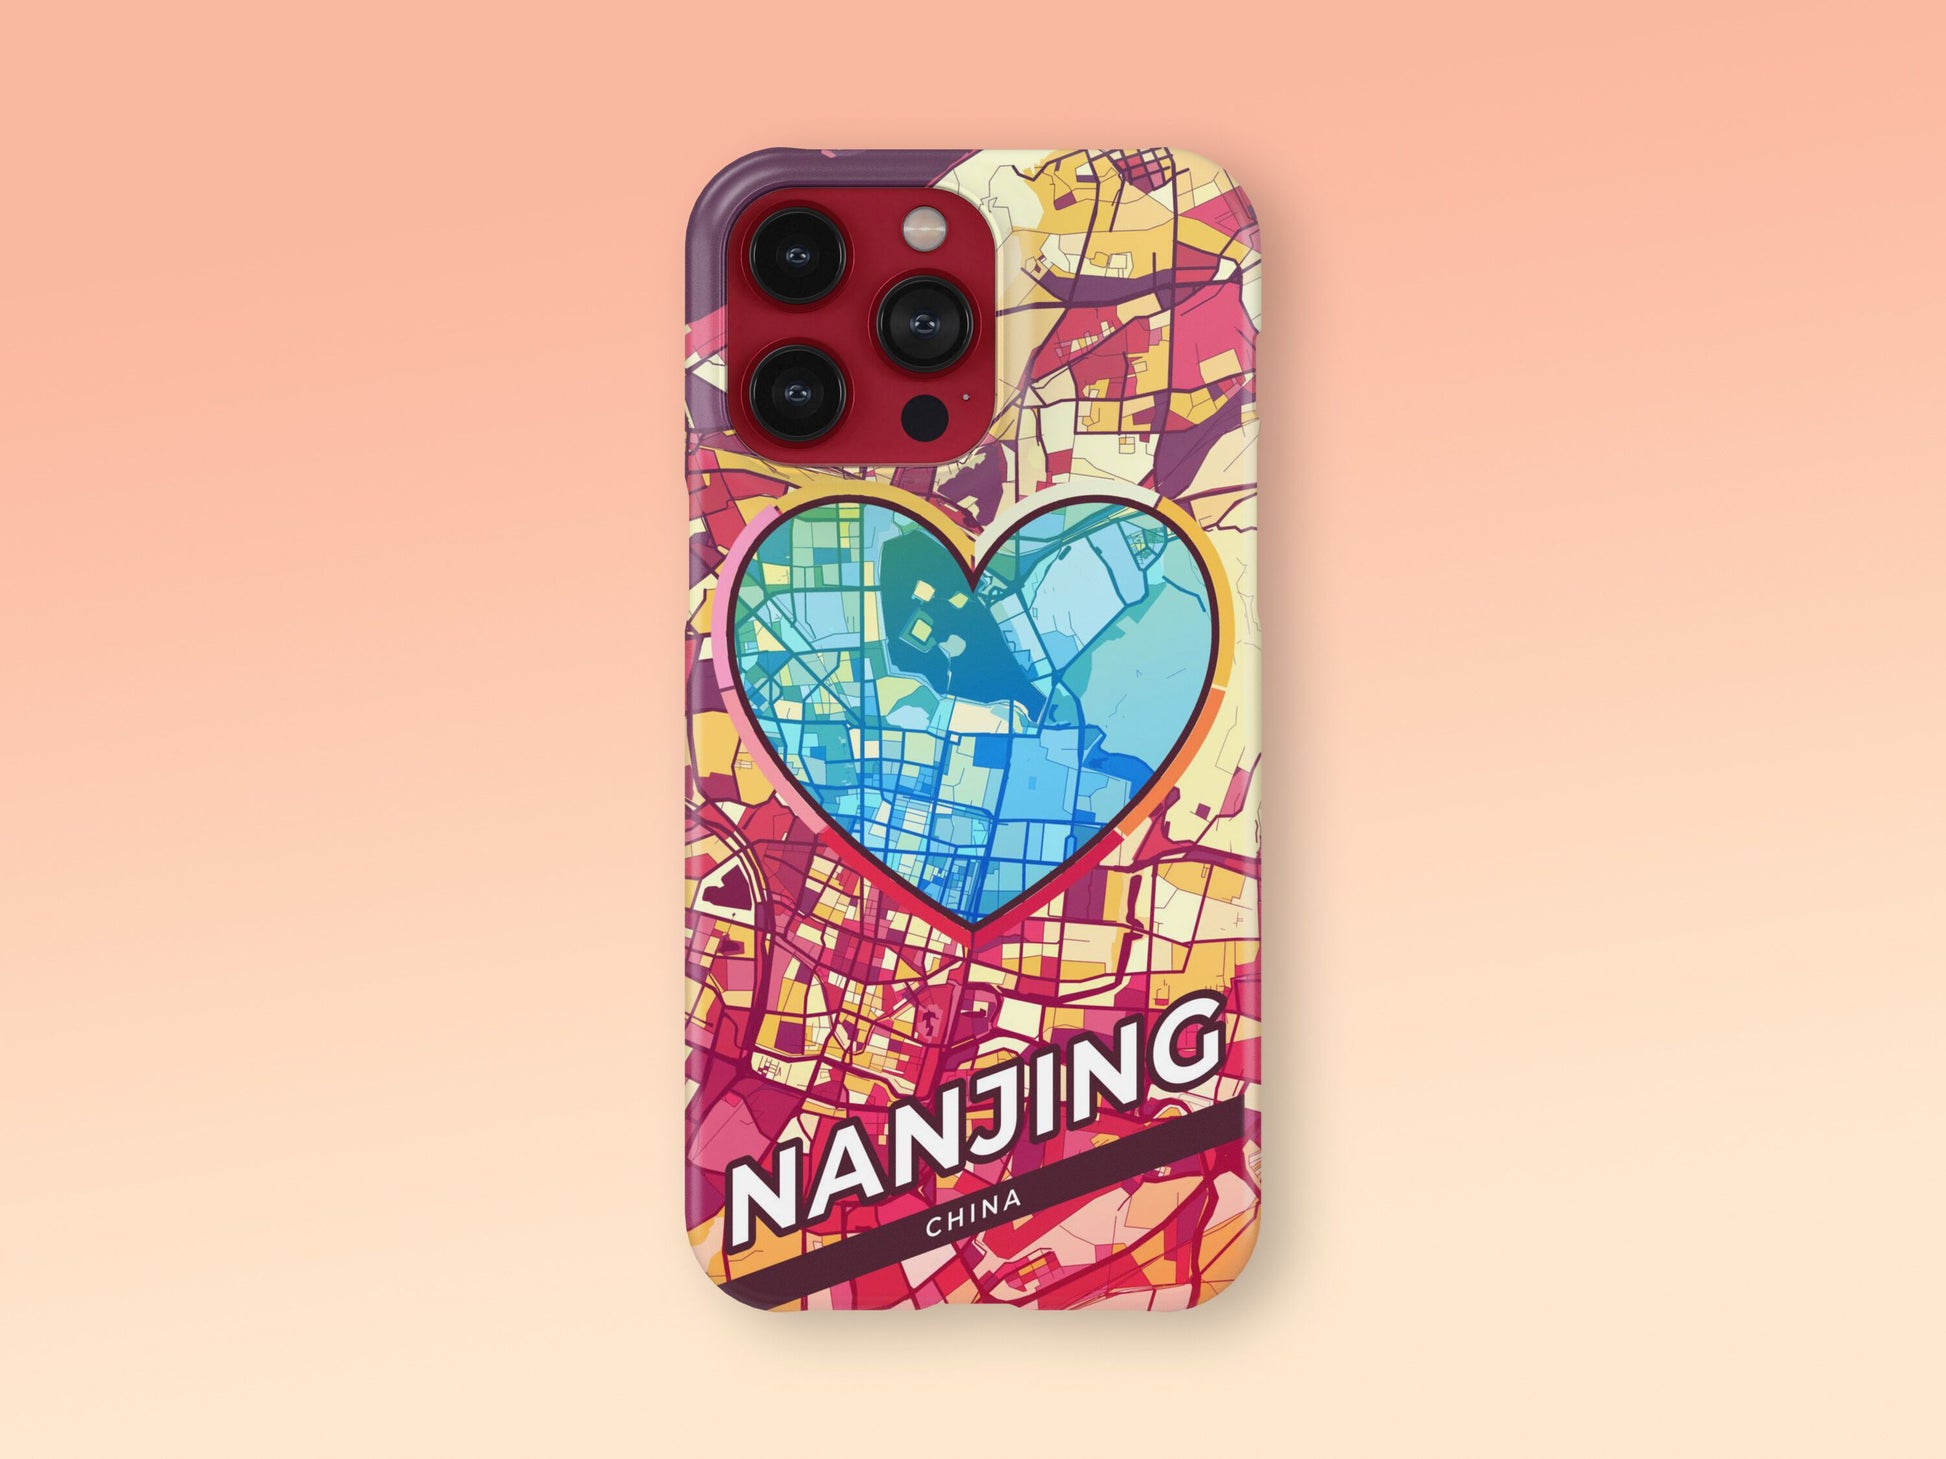 Nanjing China slim phone case with colorful icon. Birthday, wedding or housewarming gift. Couple match cases. 2